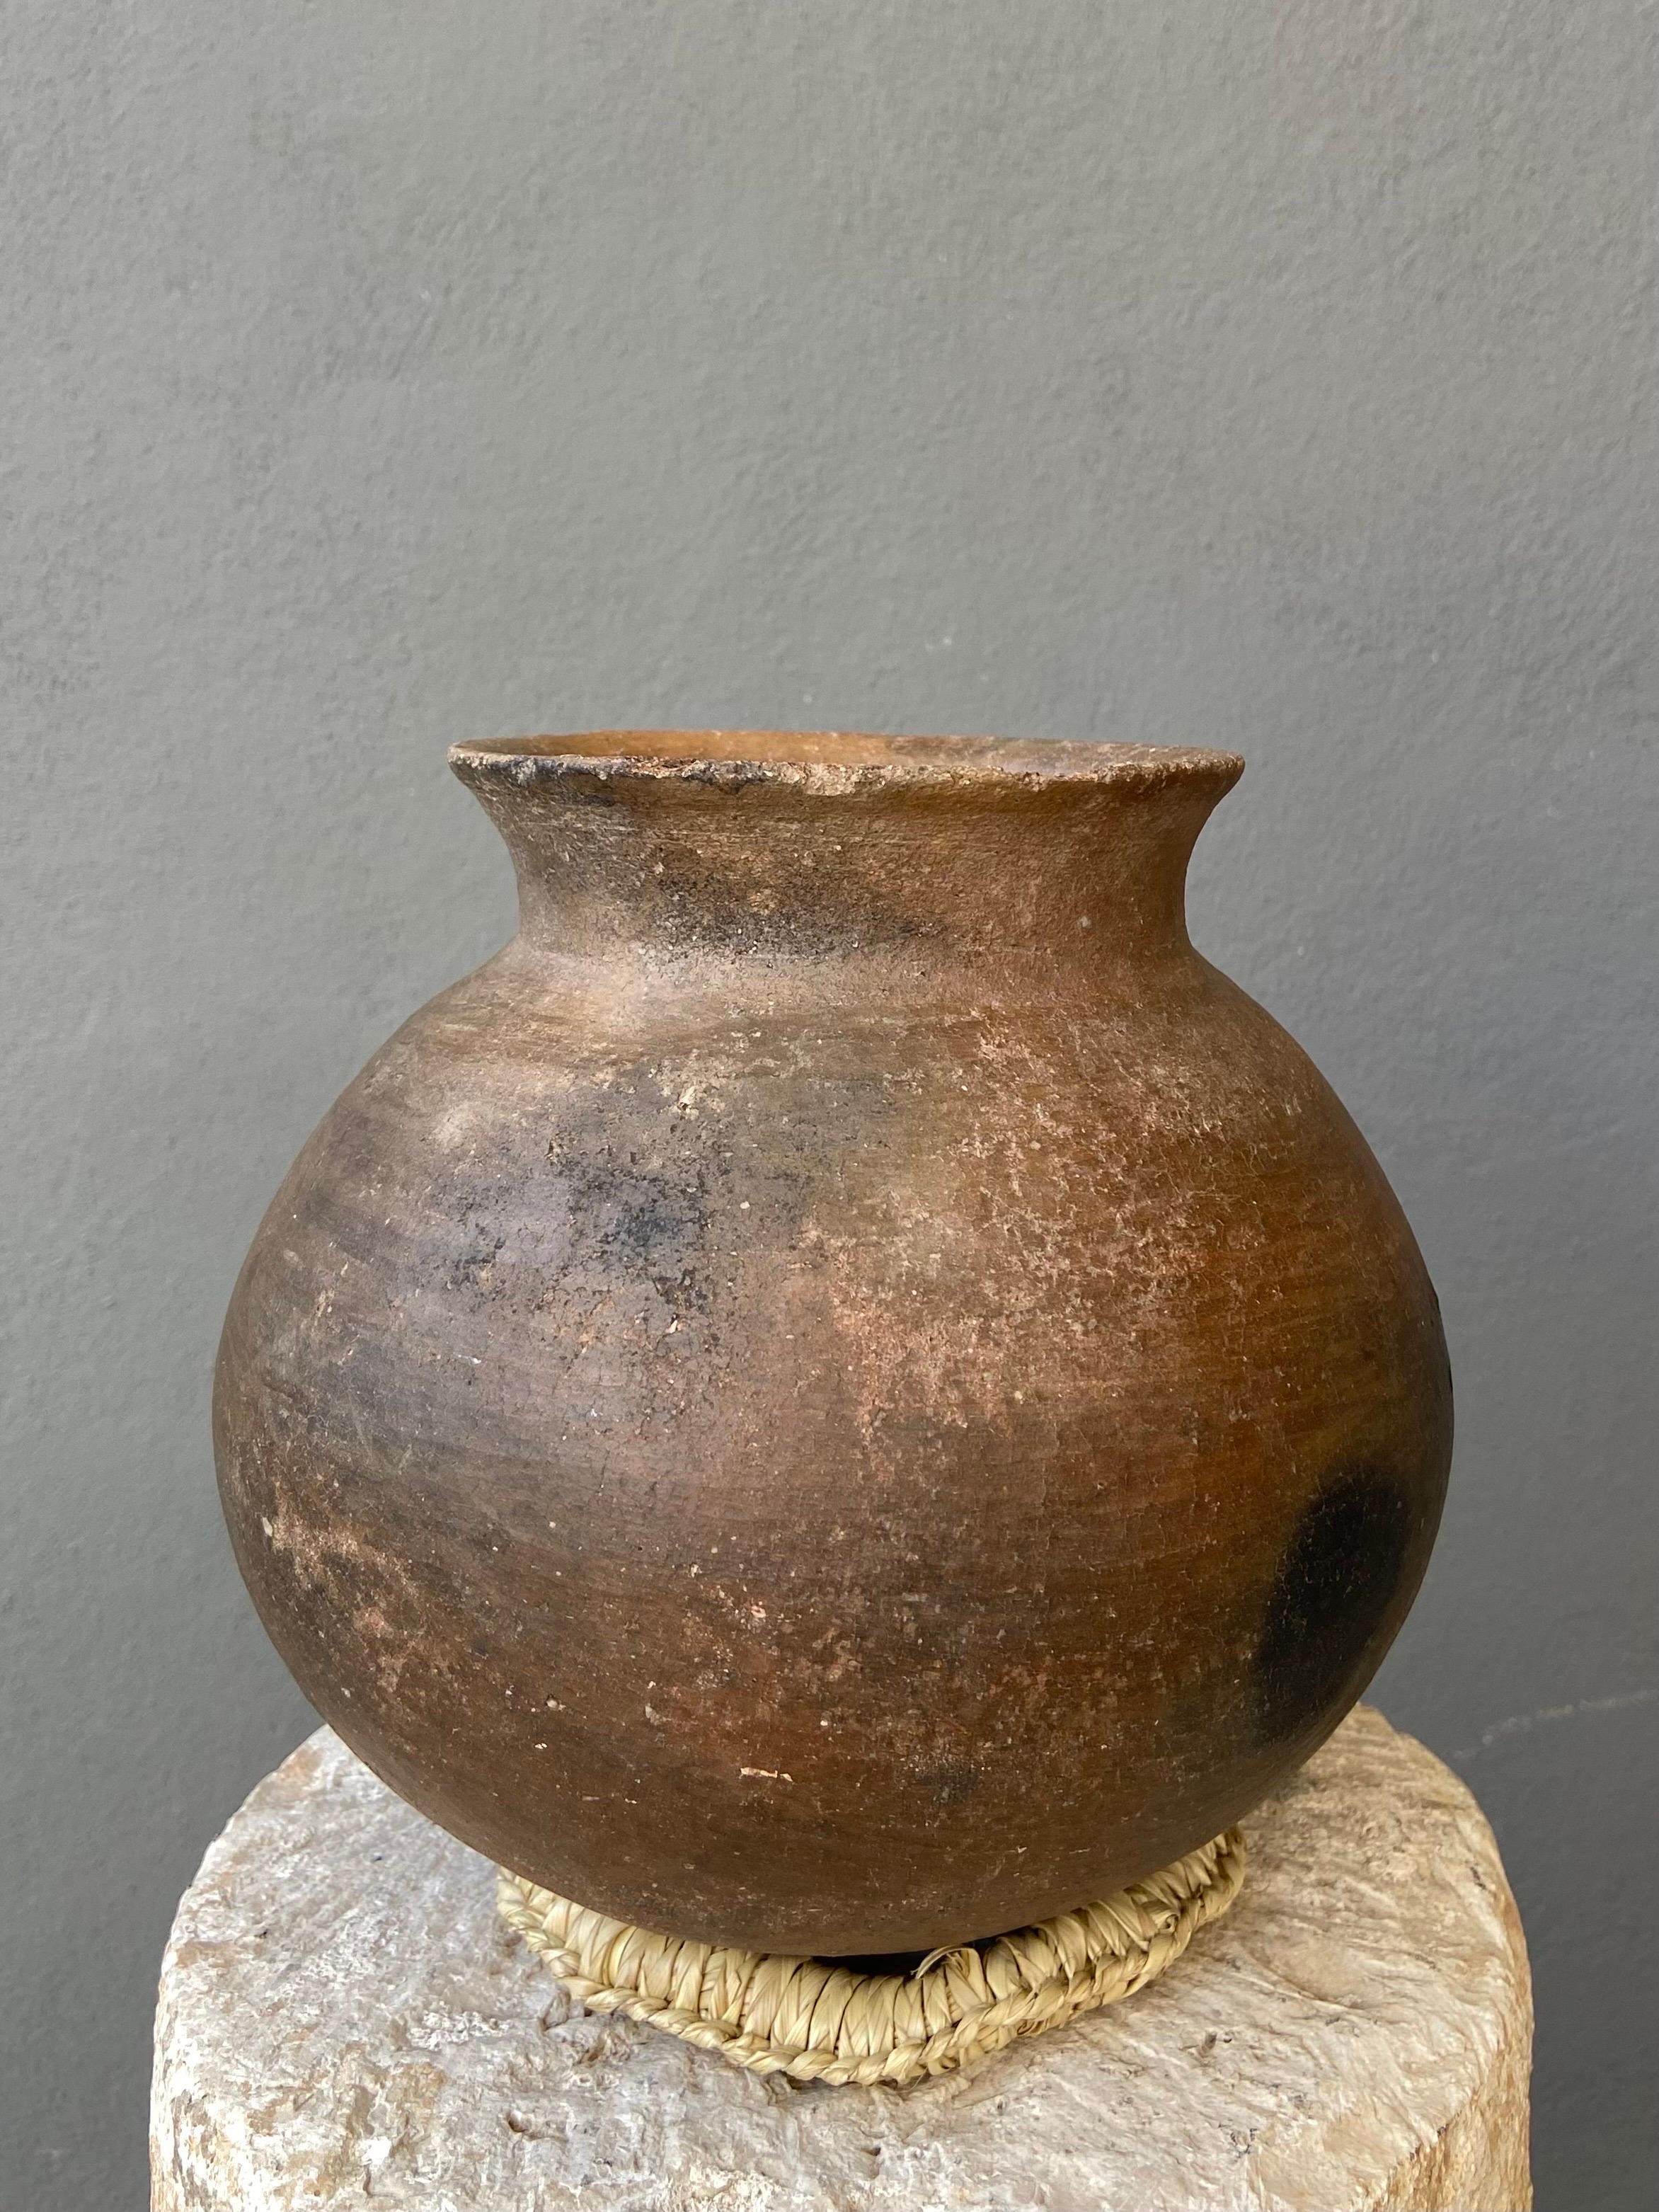 Fired Terracotta Cooking Pot From The Mixteca Region of Oaxaca, Mexico